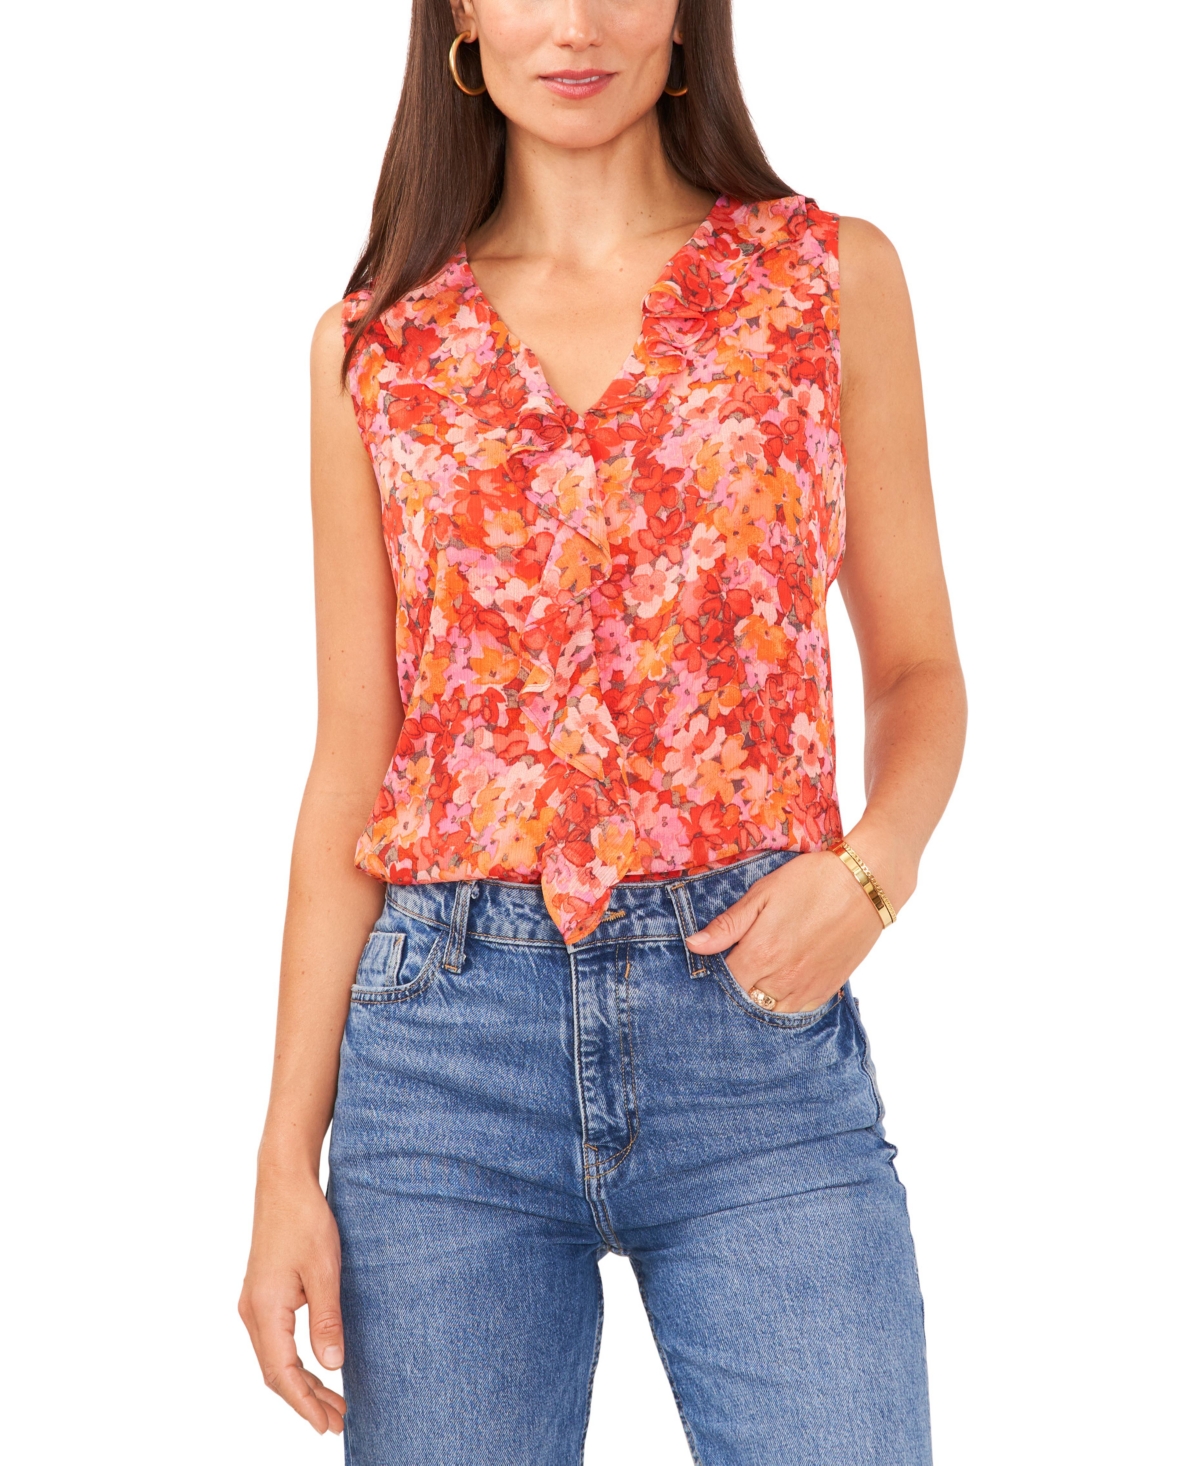 Women's Sleeveless Ruffled Floral Print Top - Tulip Red